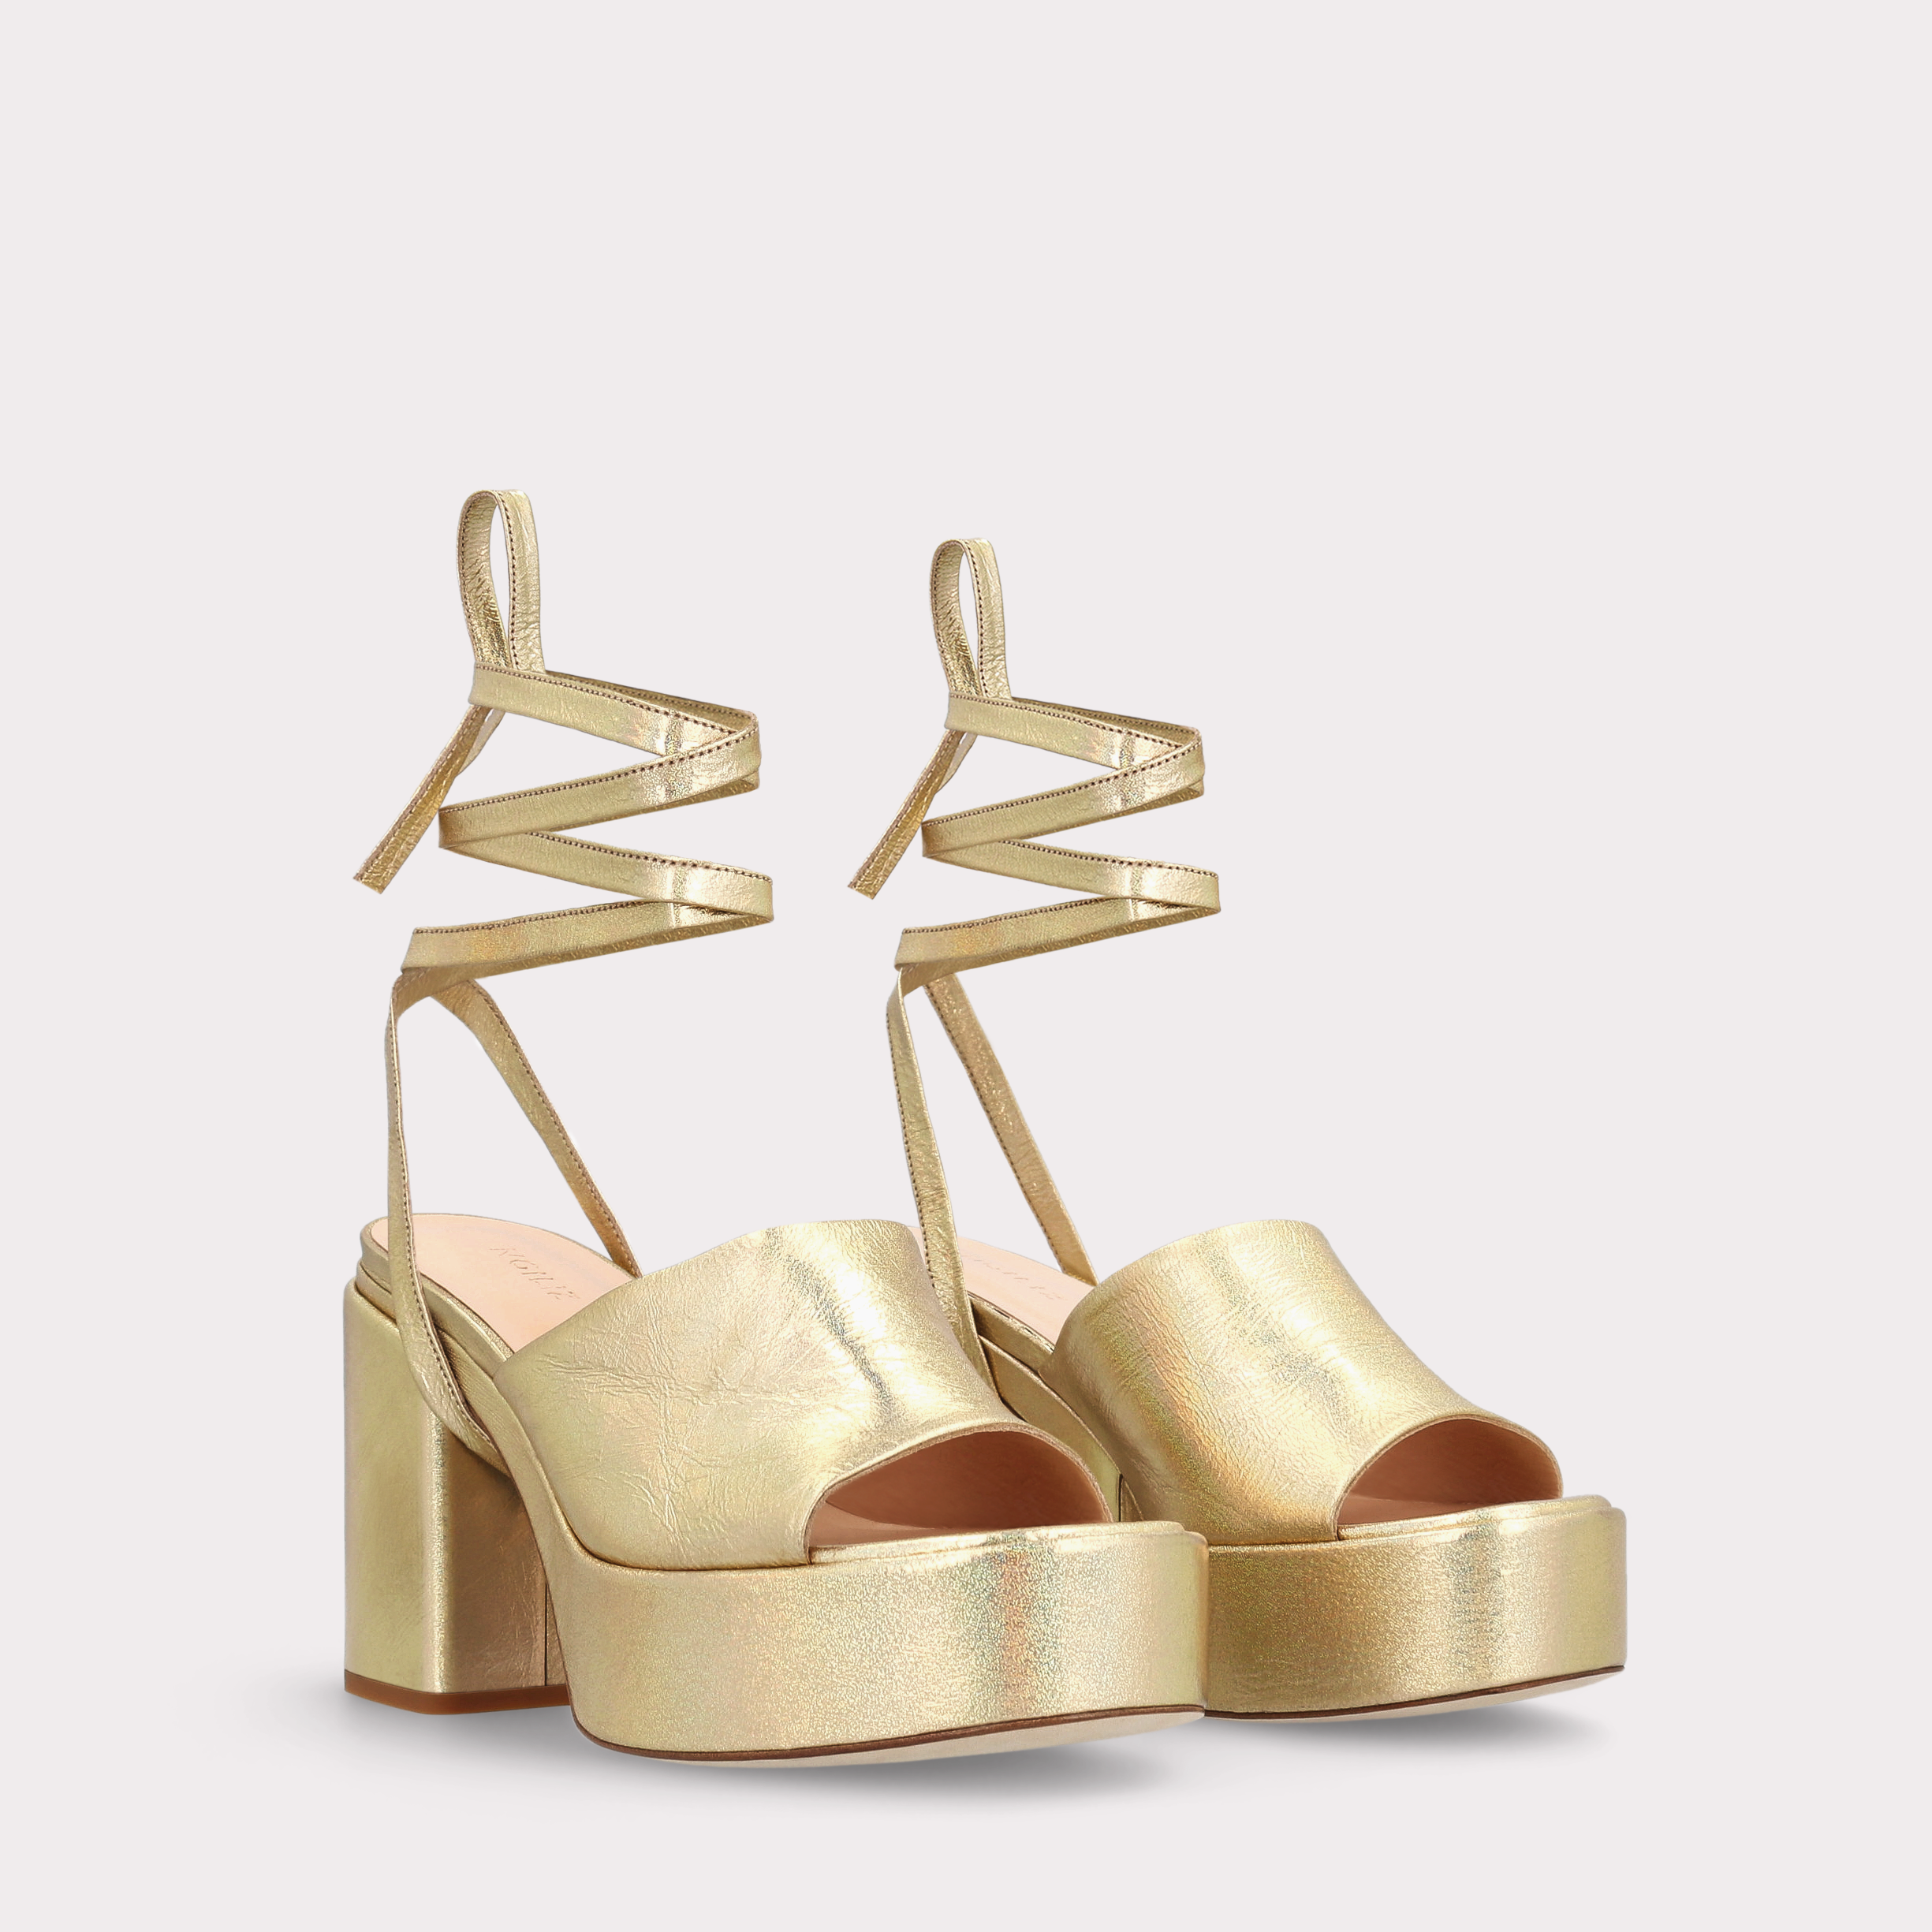 AKAADA 02 GOLD CRUSHED PATENT LEATHER SANDALS